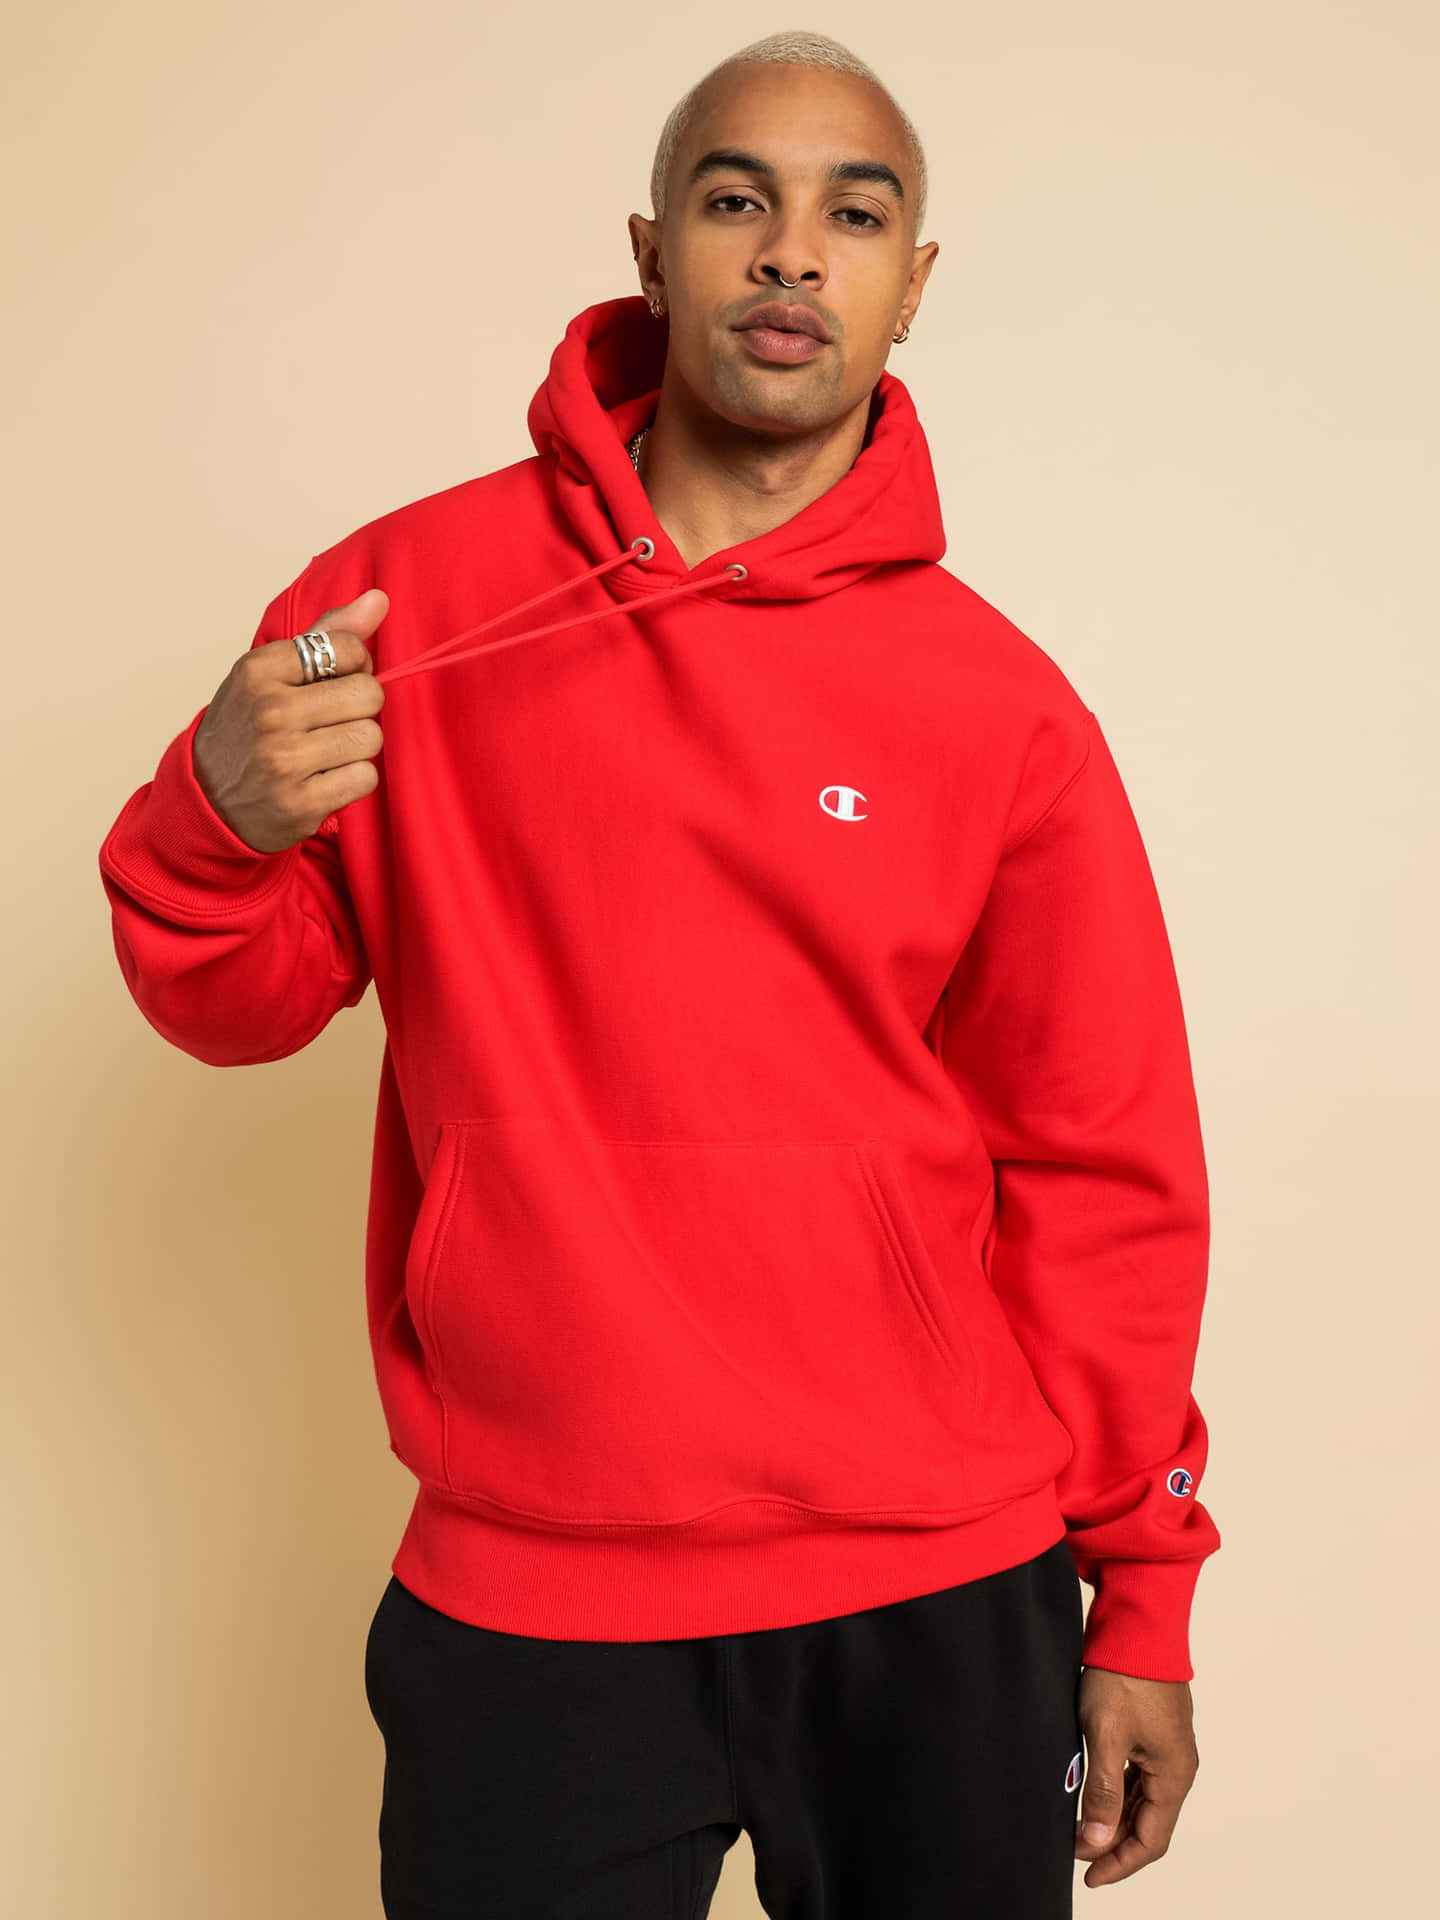 Stylish person in red hoodie against a colorful backdrop Wallpaper